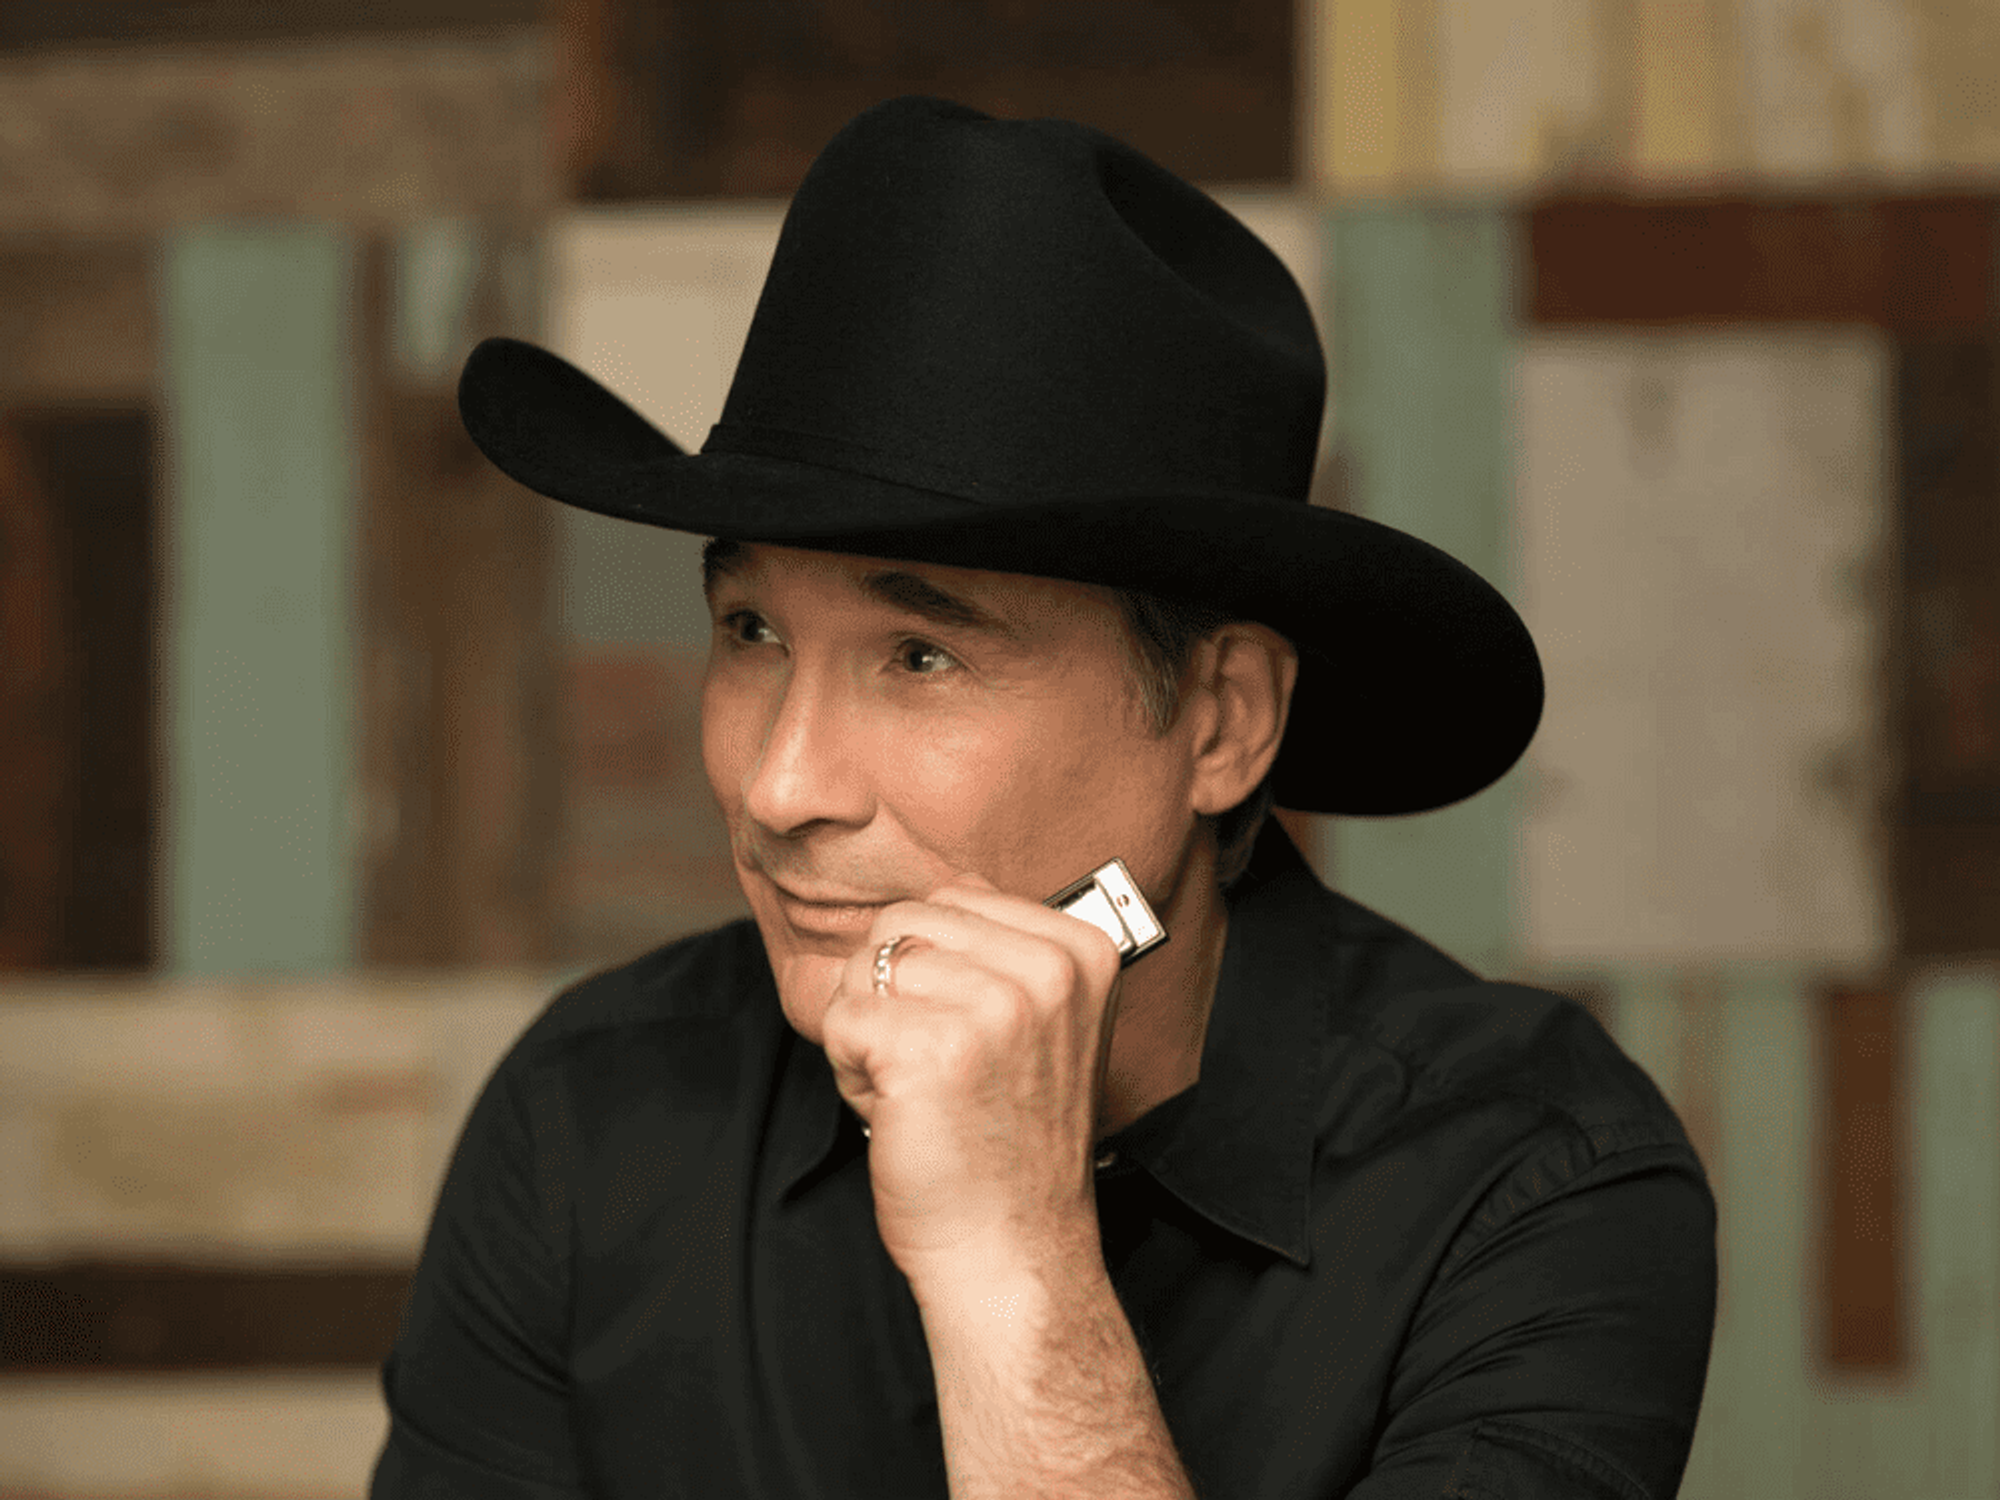 Clint Black will play at the Eisemann Center for the Performing Arts in Richardson on October 12.